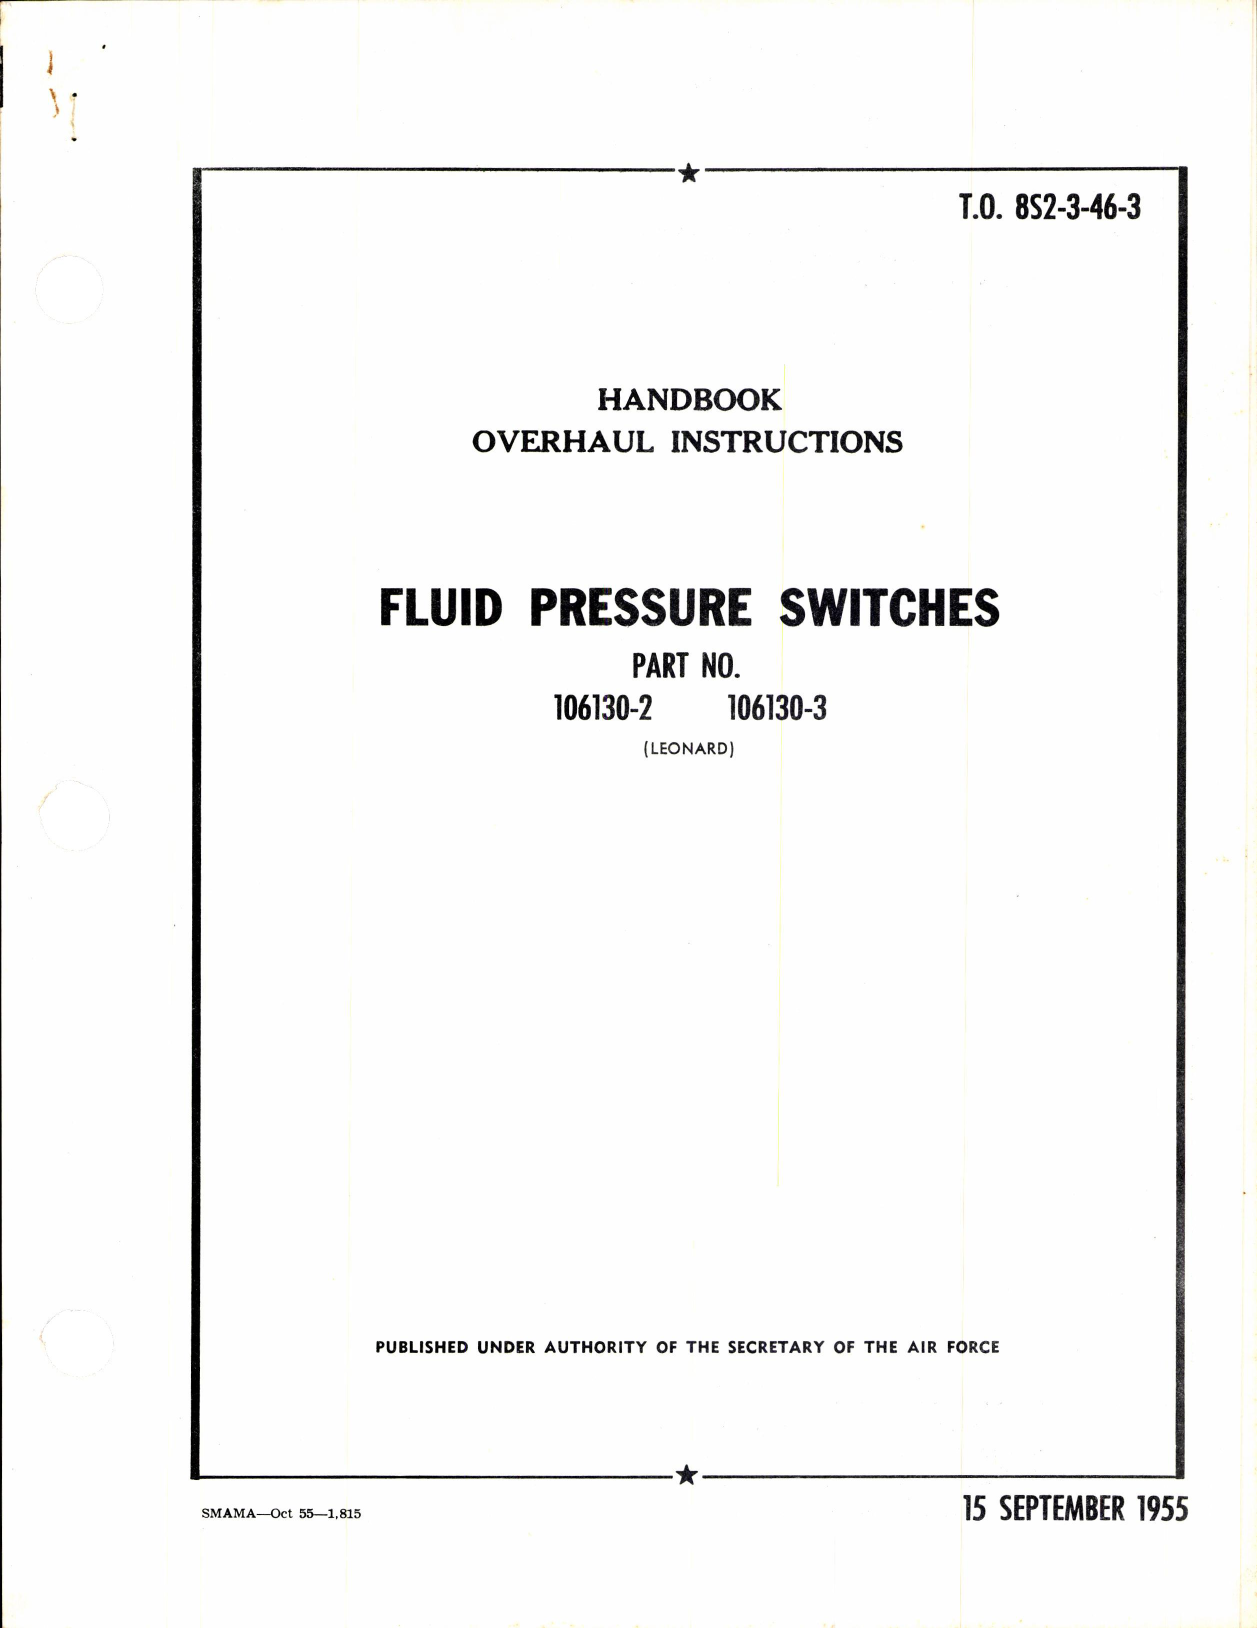 Sample page 1 from AirCorps Library document: Fluid Pressure Switches Part No 106130-2 and 106130-3